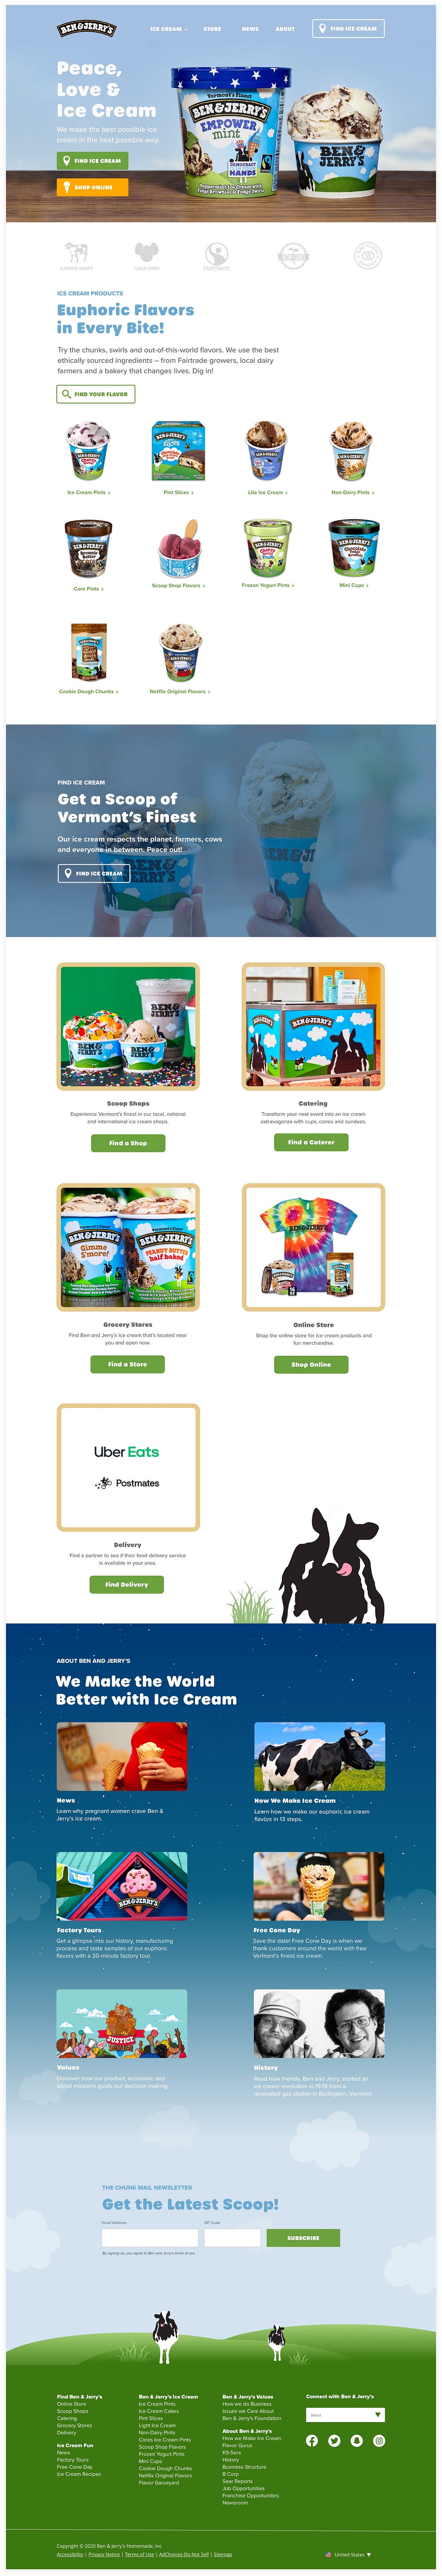 High-fidelity redesign of Ben & Jerry’s homepage.